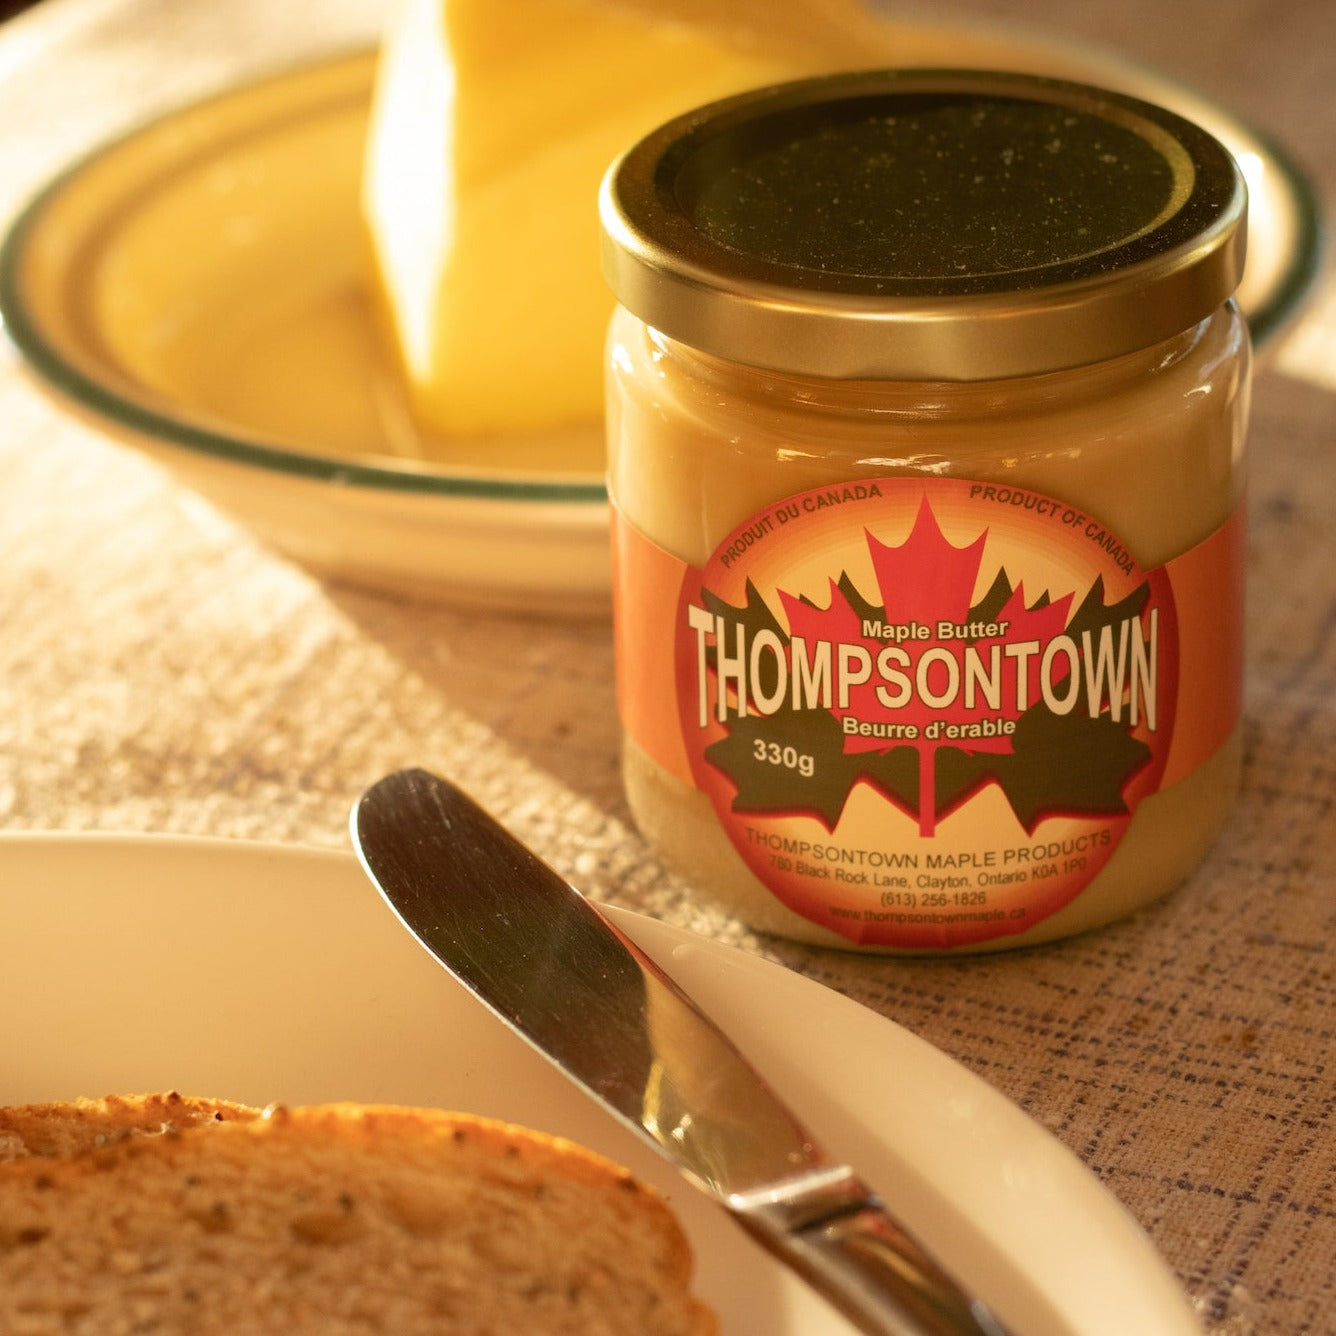 330 g Jar of Pure Thompsontown Maple Butter-Product of Ontario Canada